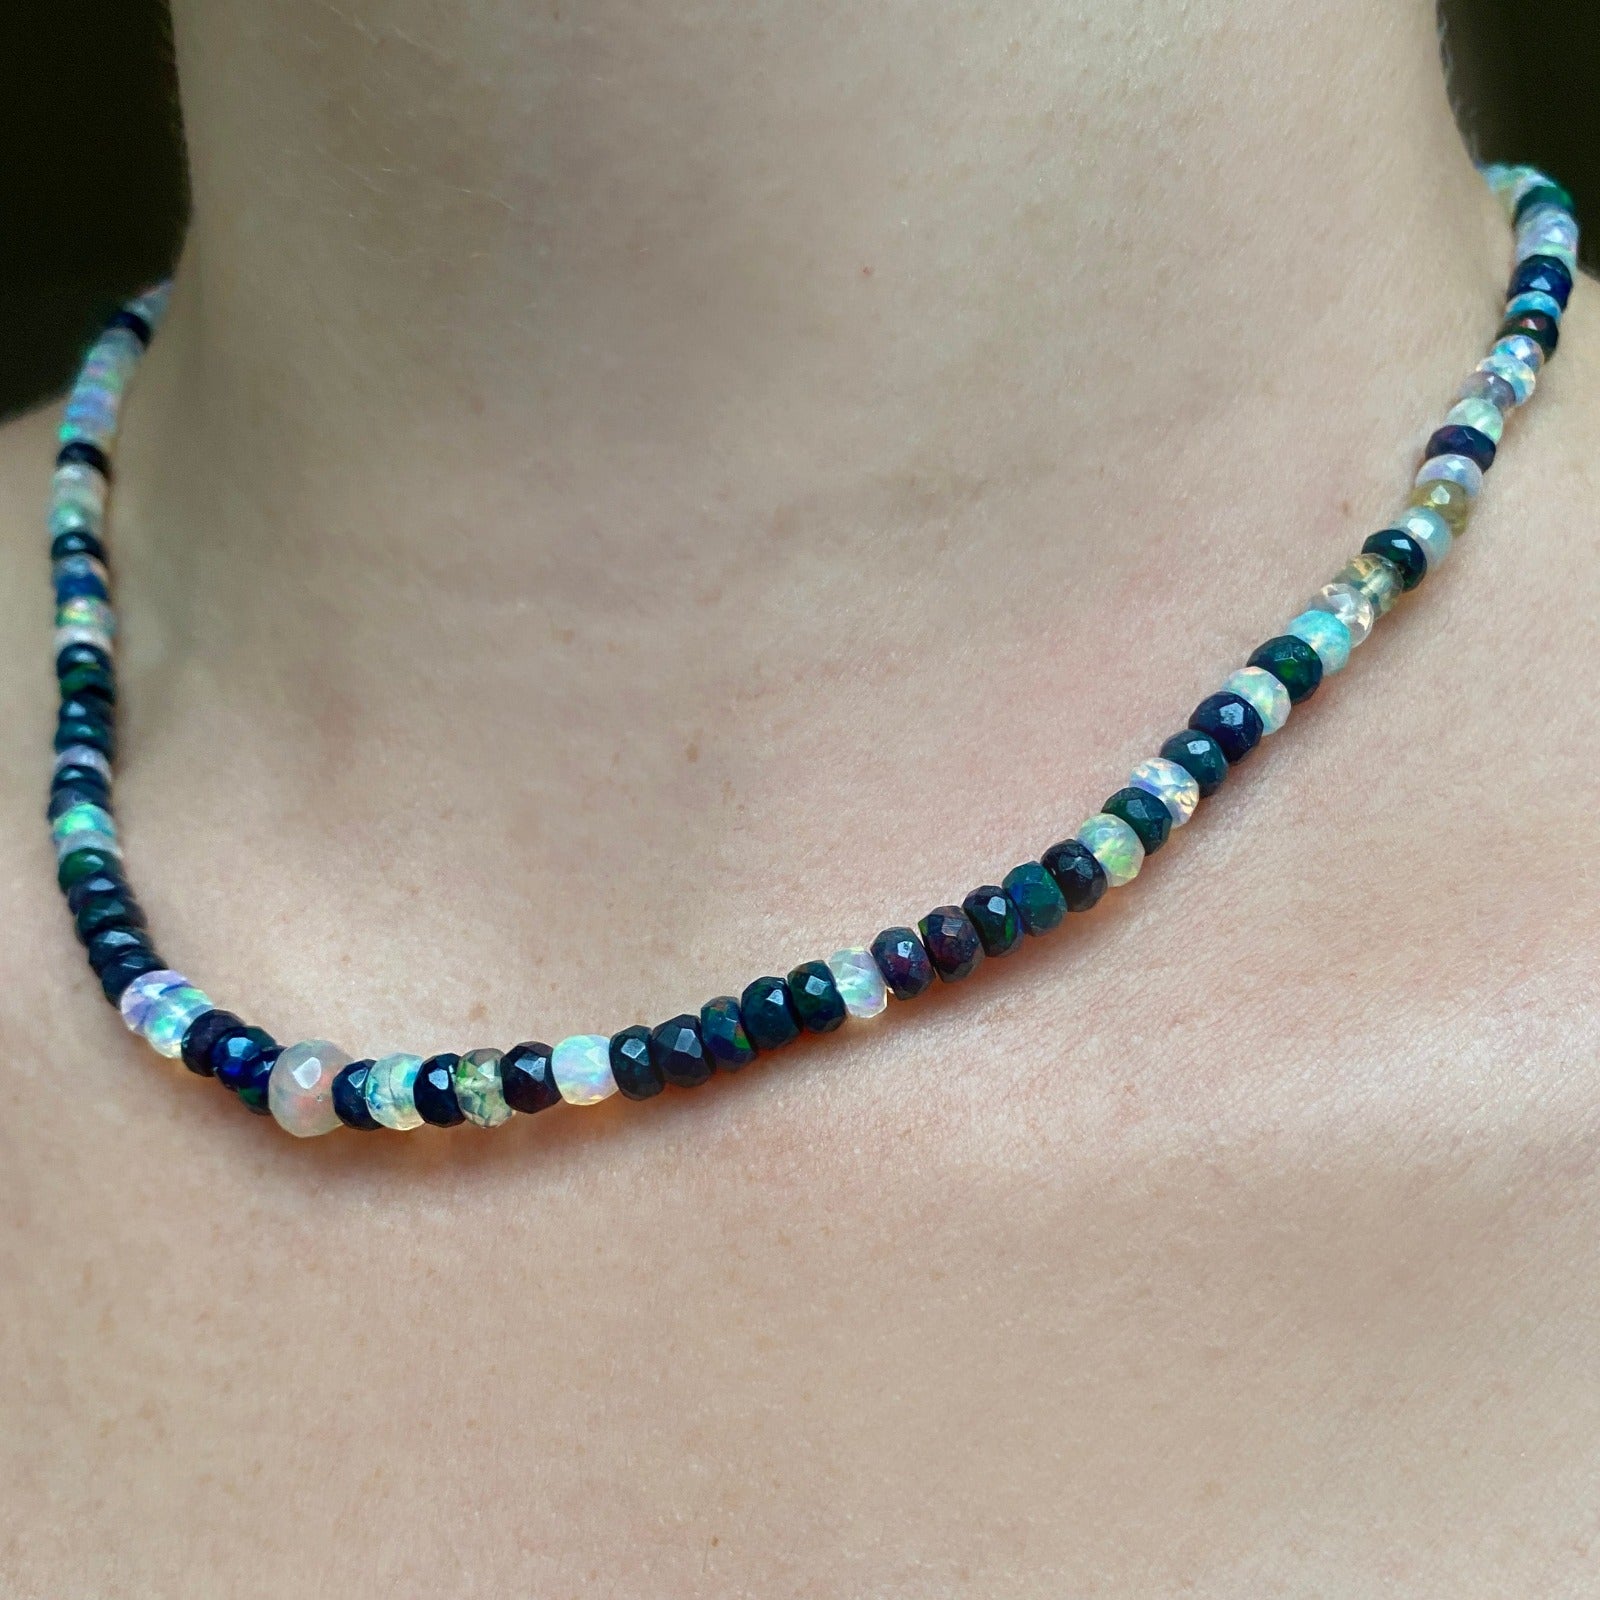 Shimmering beaded necklace made of faceted opals in shades of fiery pastels, grey, teal, and black on a gold linking ovals clasp.